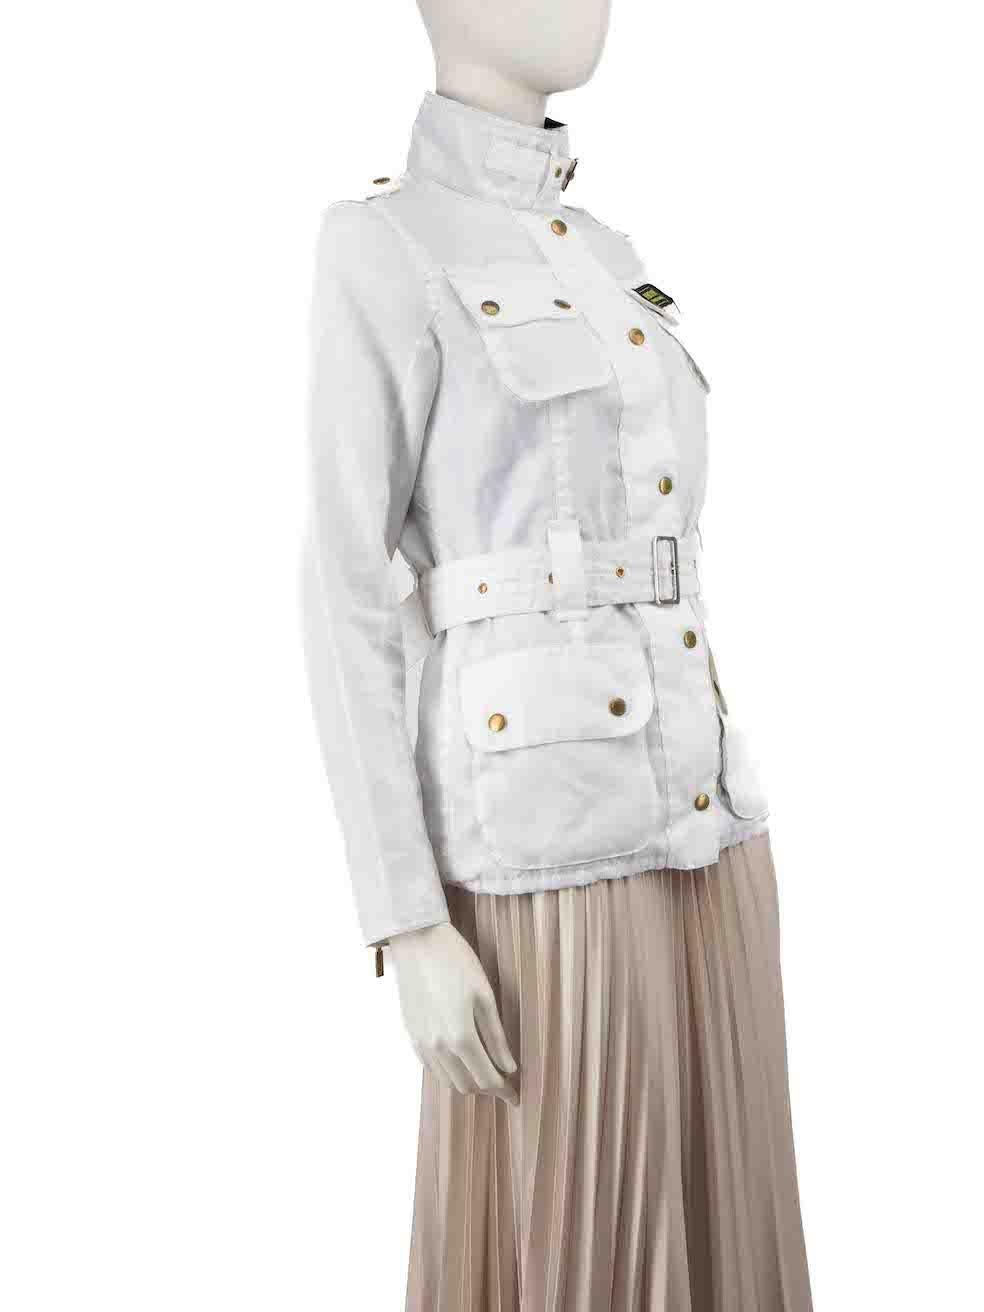 CONDITION is Very good. There is a small mark to the front right side pocket on this Barbour designer resale item.
 
 
 
 Details
 
 
 White
 
 Polyester
 
 Jacket
 
 Waxed fabric
 
 Zip and snap button fastening
 
 Neck and waist belt
 
 4x